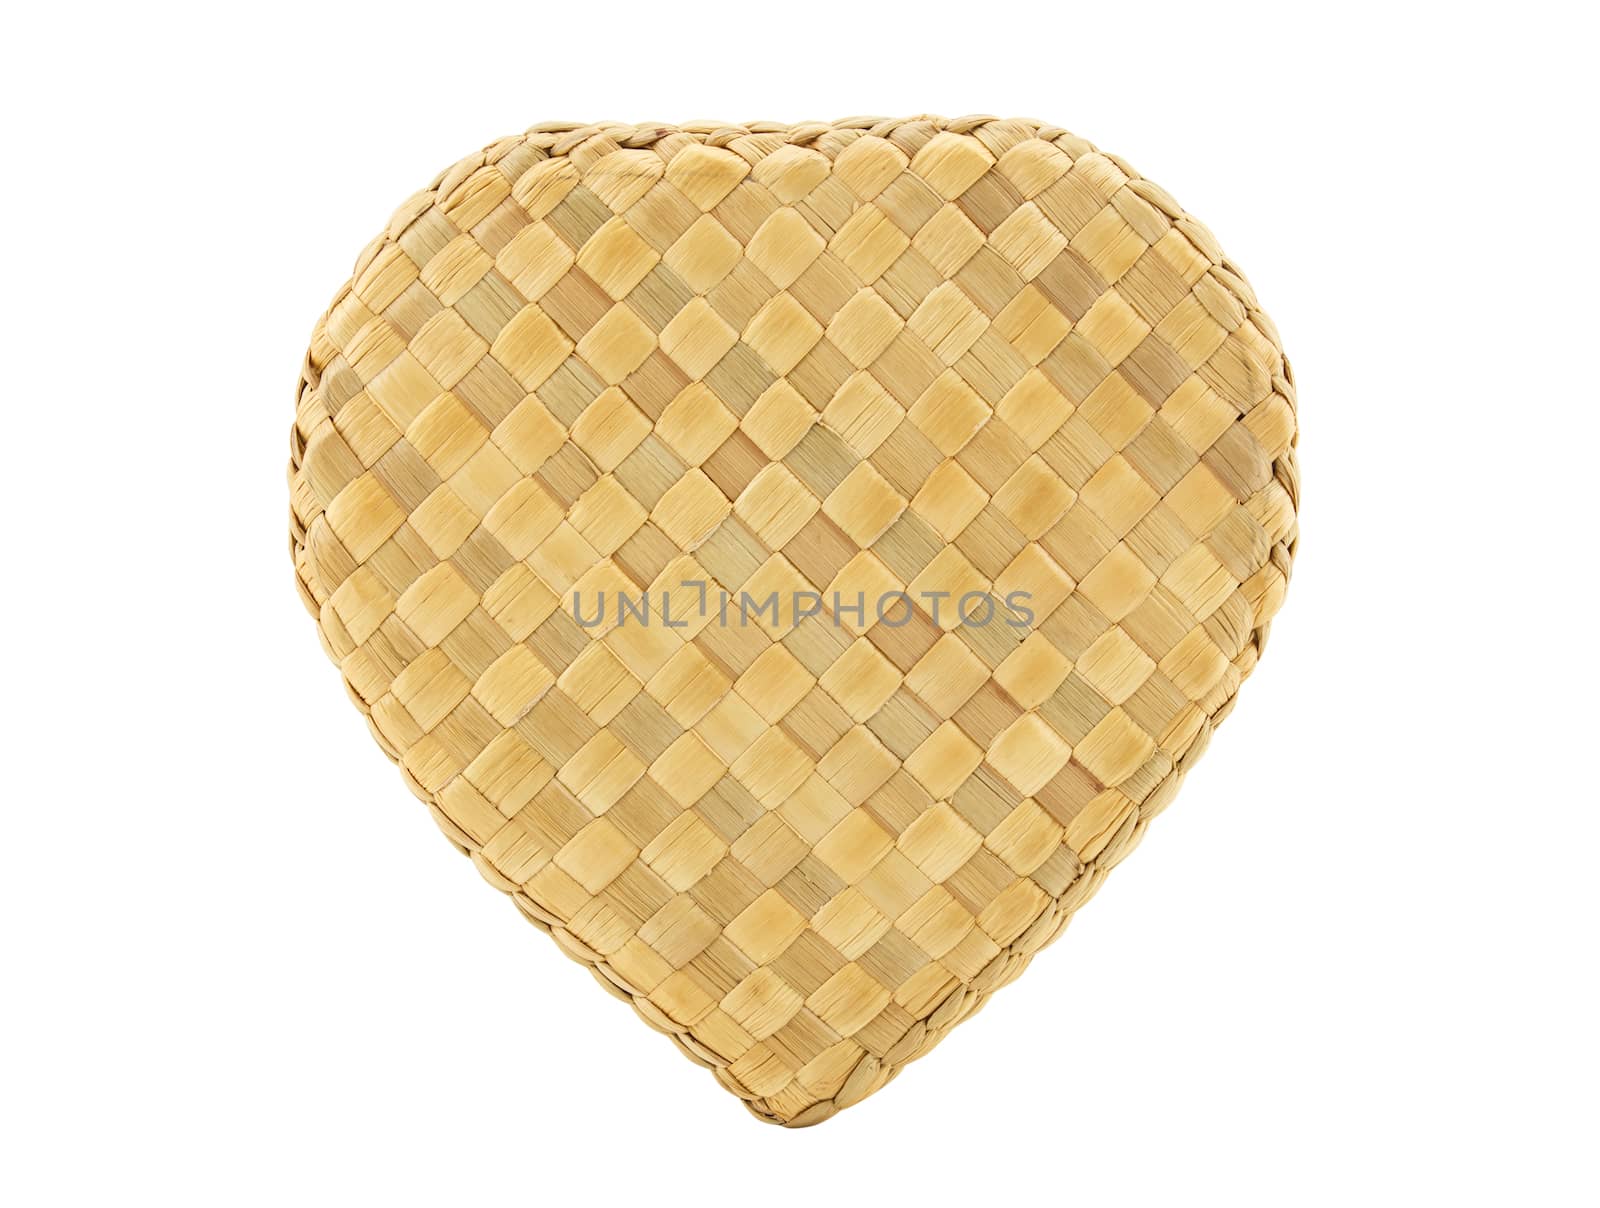 Heart shape bamboo wave on white background by vitawin